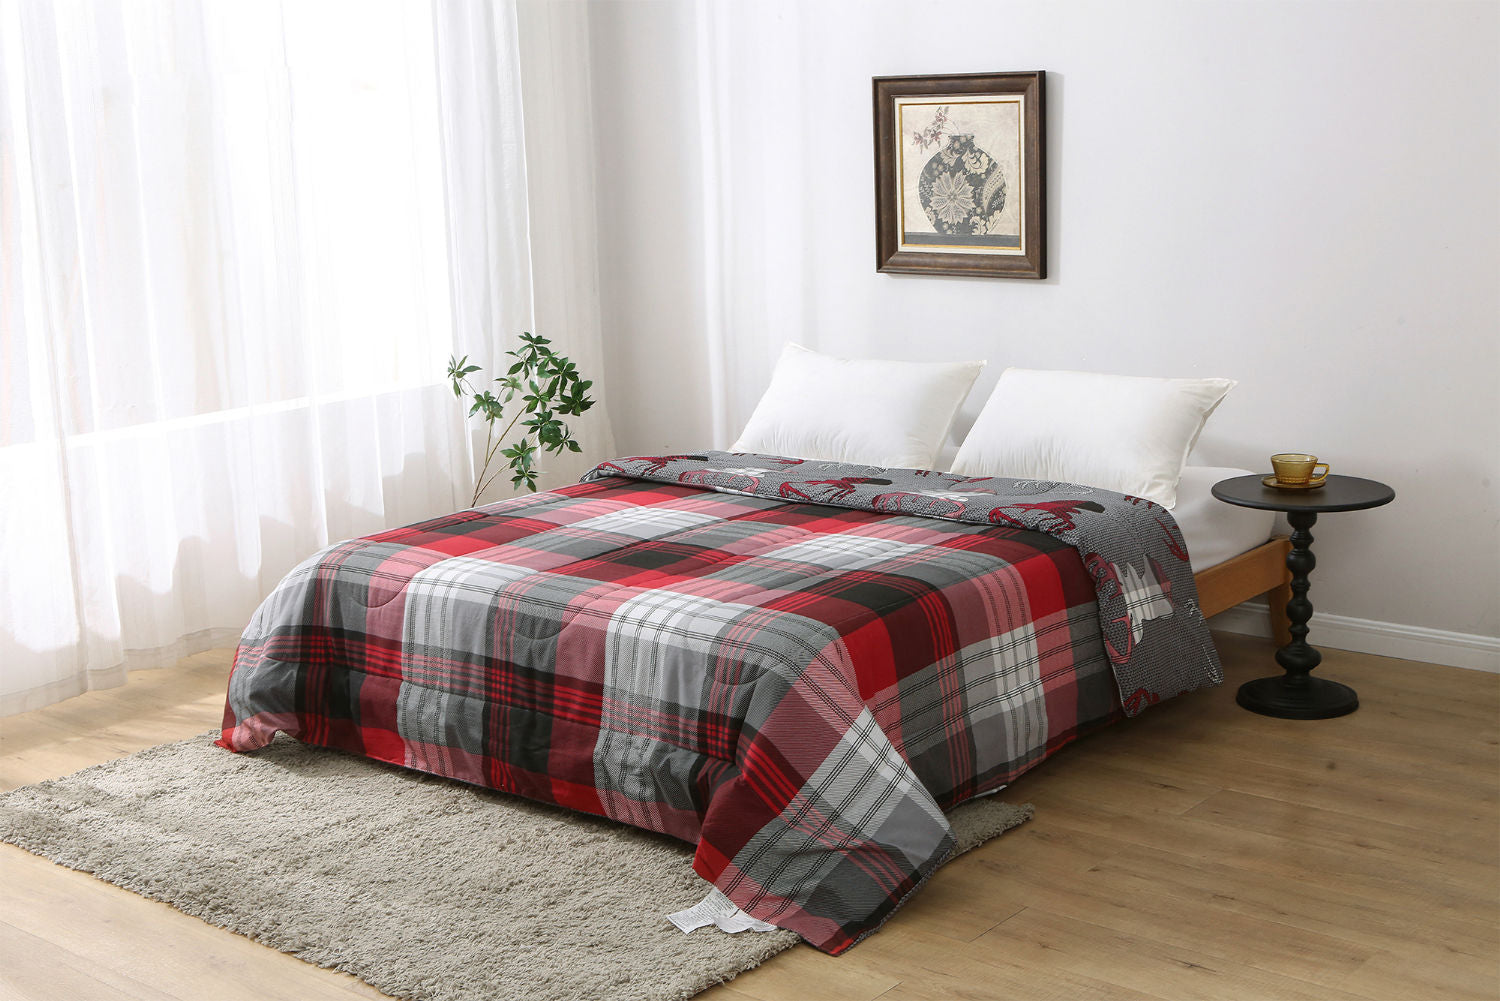 Woven Flannel Pigemnt Printed Comforter T. Plaid